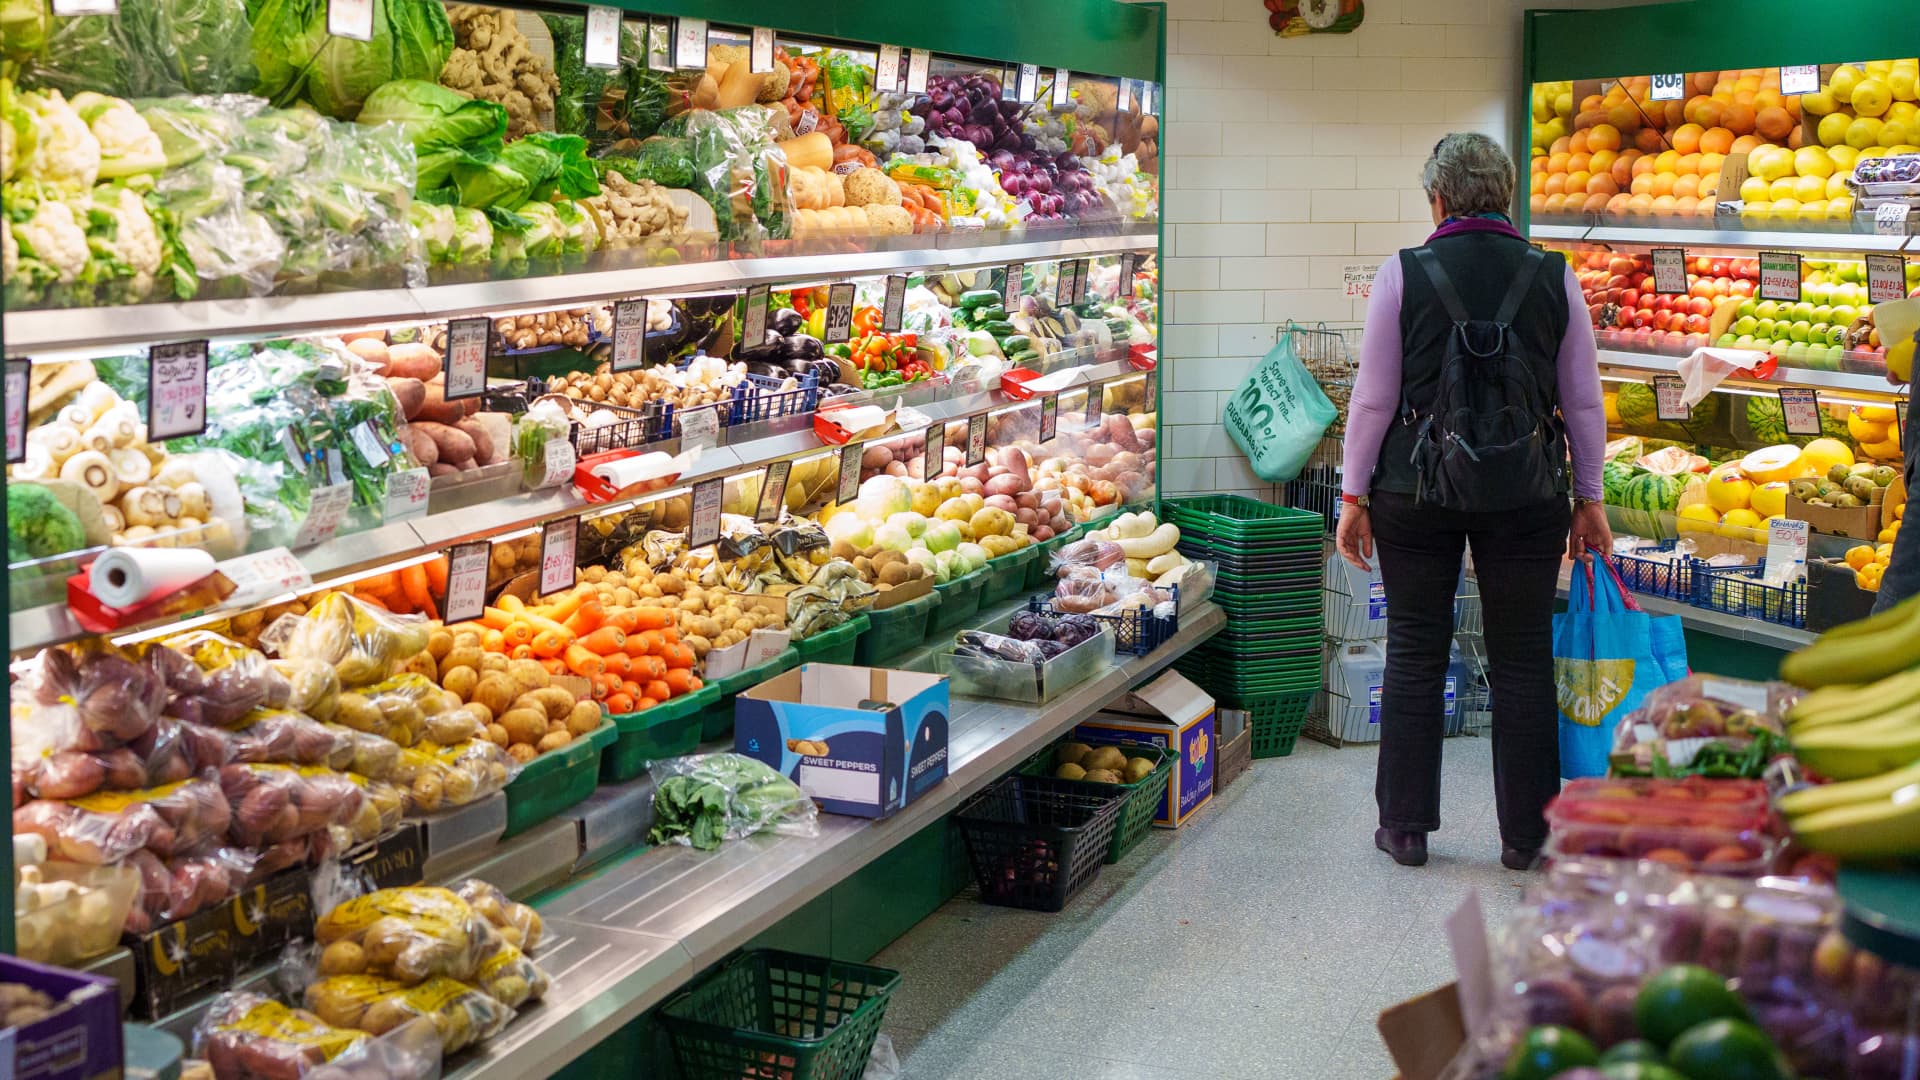 UK inflation exceeds expectations in May, piling pressure on the government and Bank of England